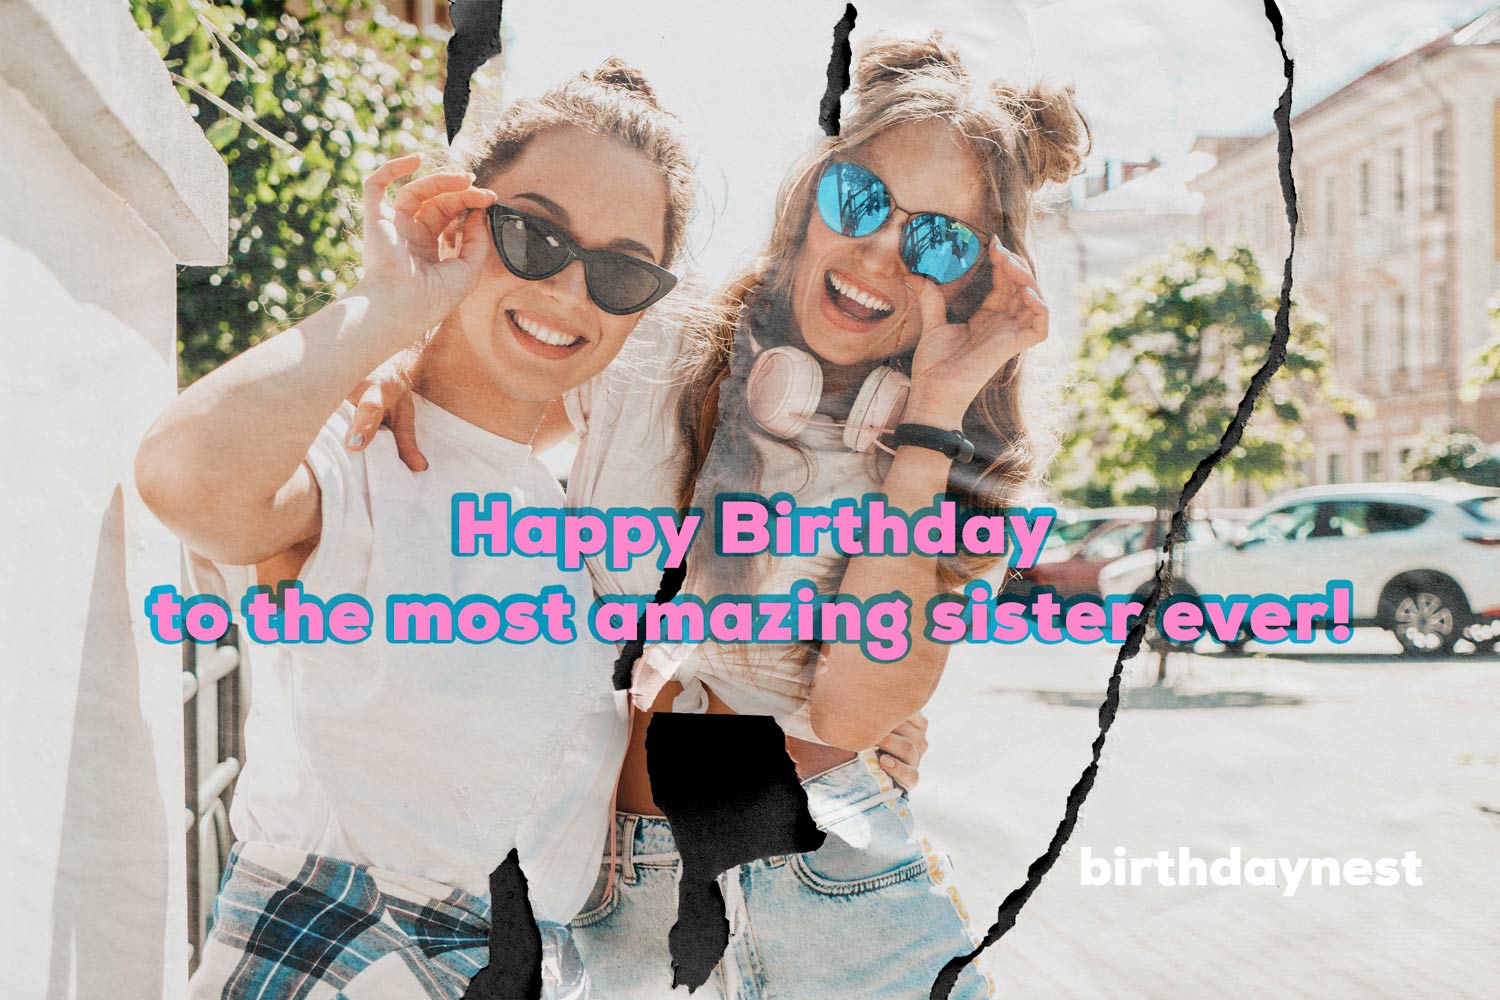 Birthday wishes for sister from sister